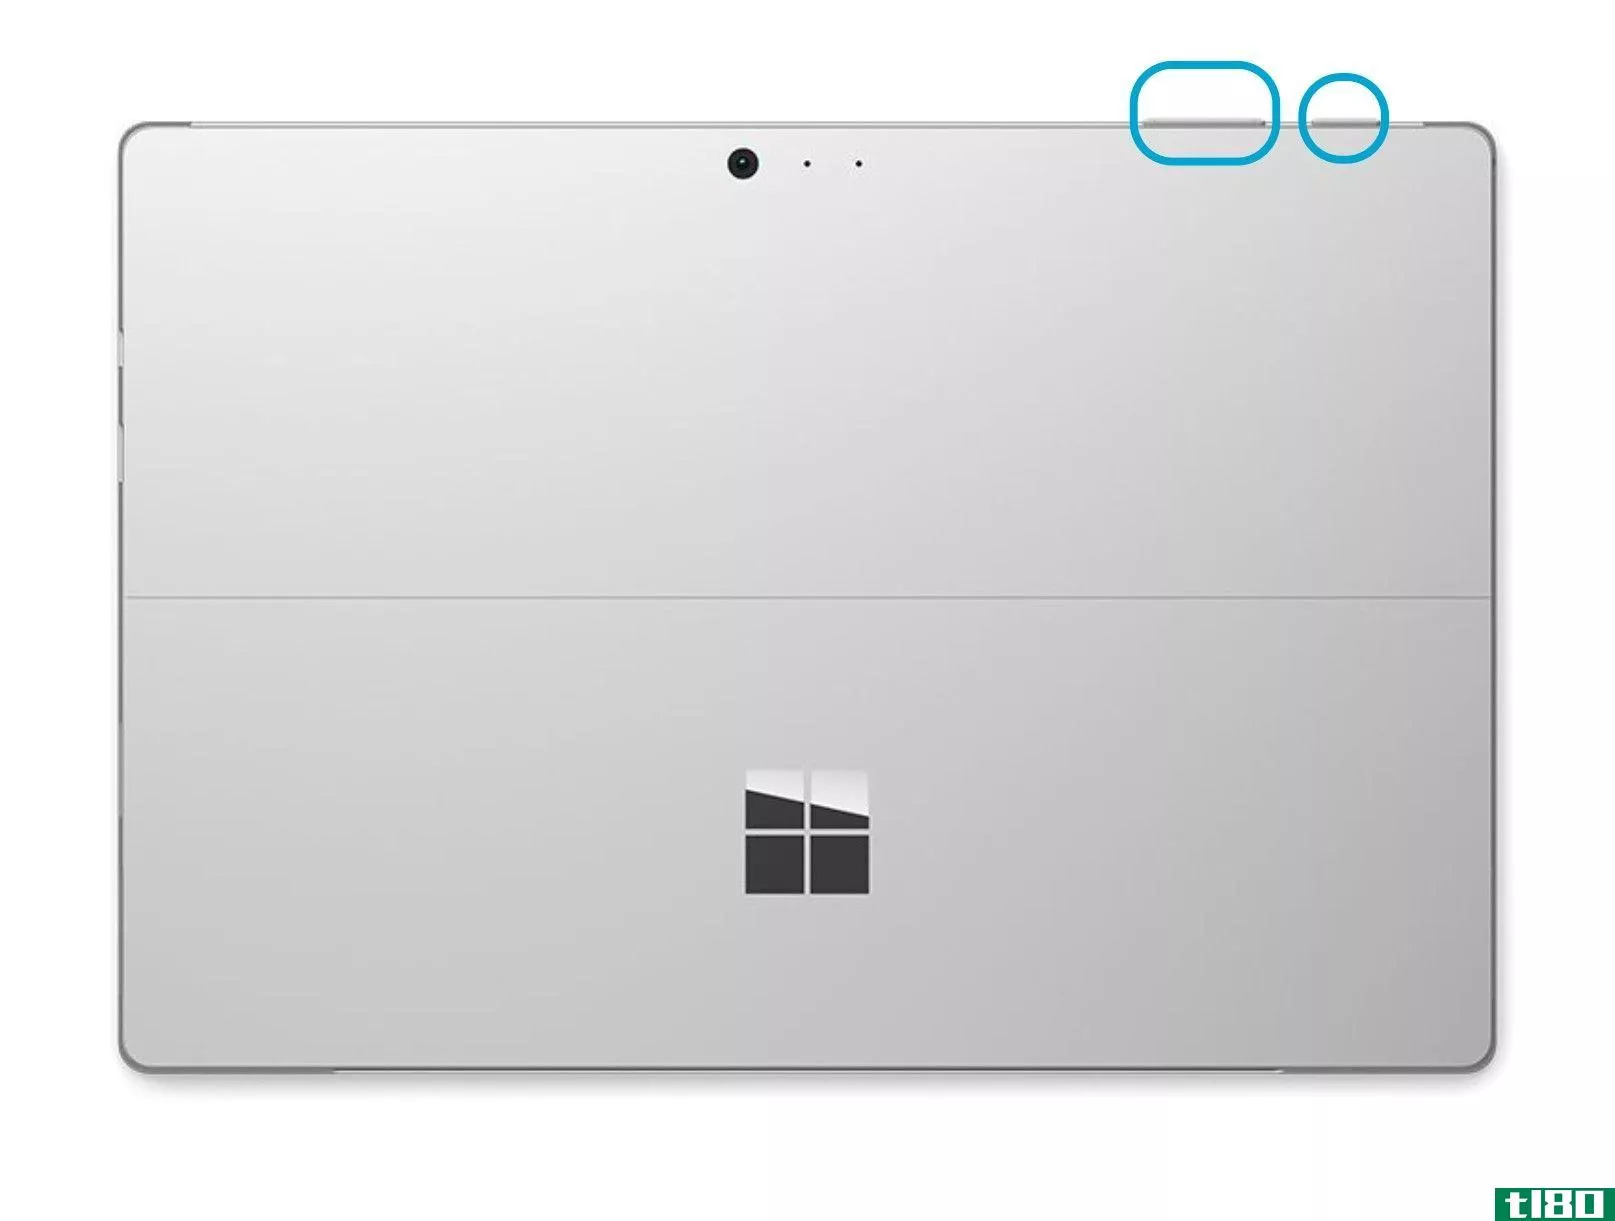 Butt*** of the Microsoft Surface Pro circled